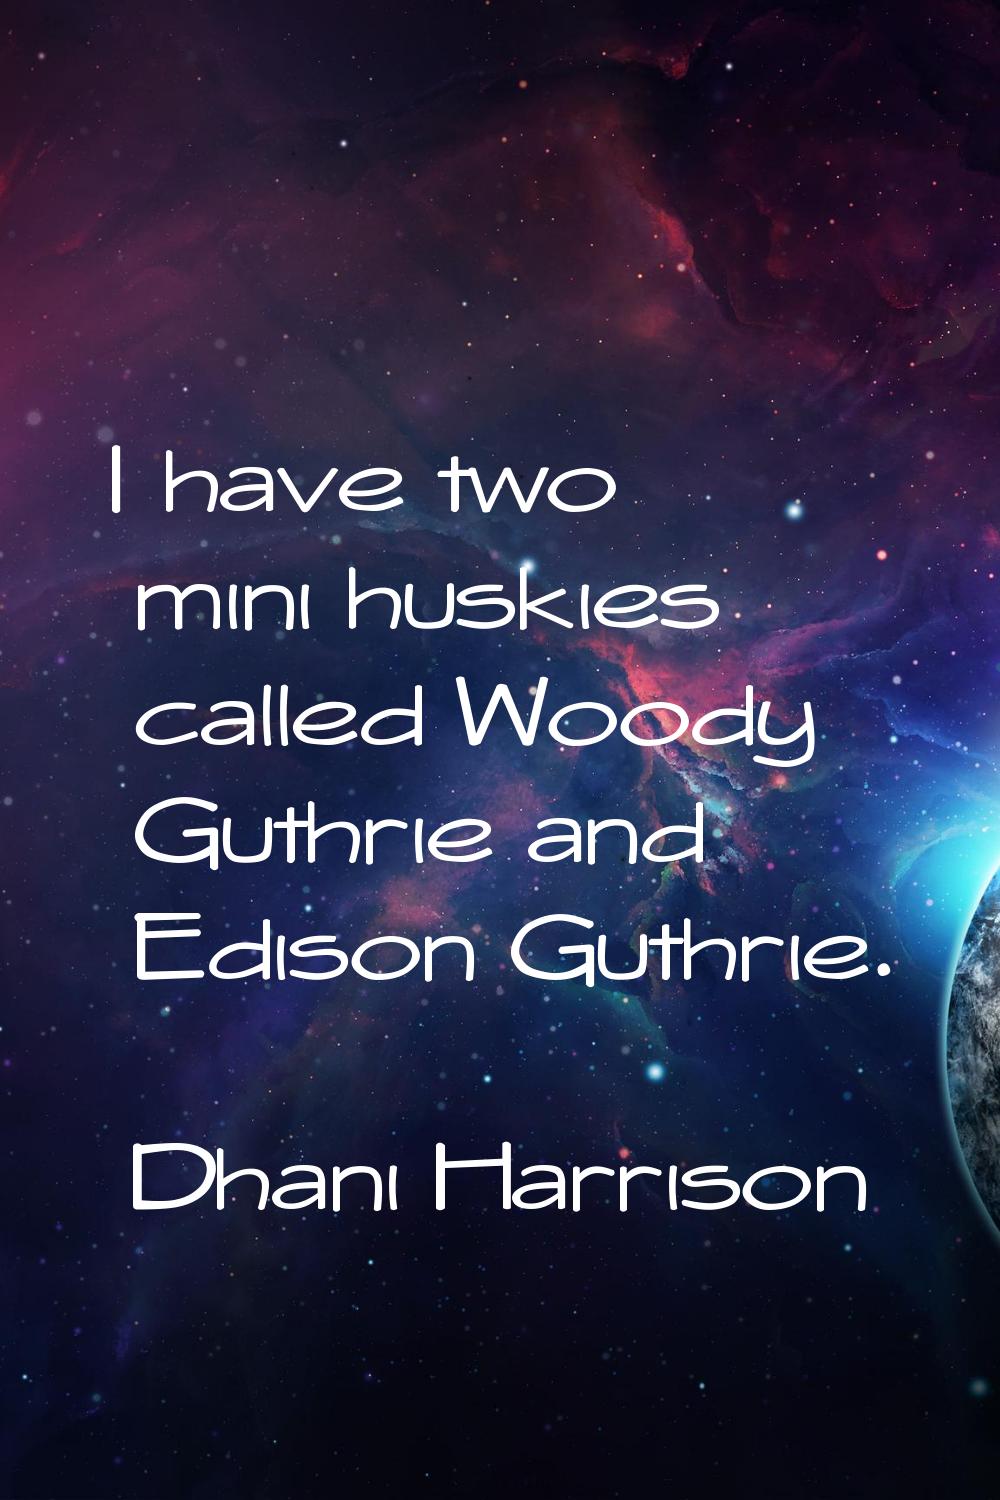 I have two mini huskies called Woody Guthrie and Edison Guthrie.